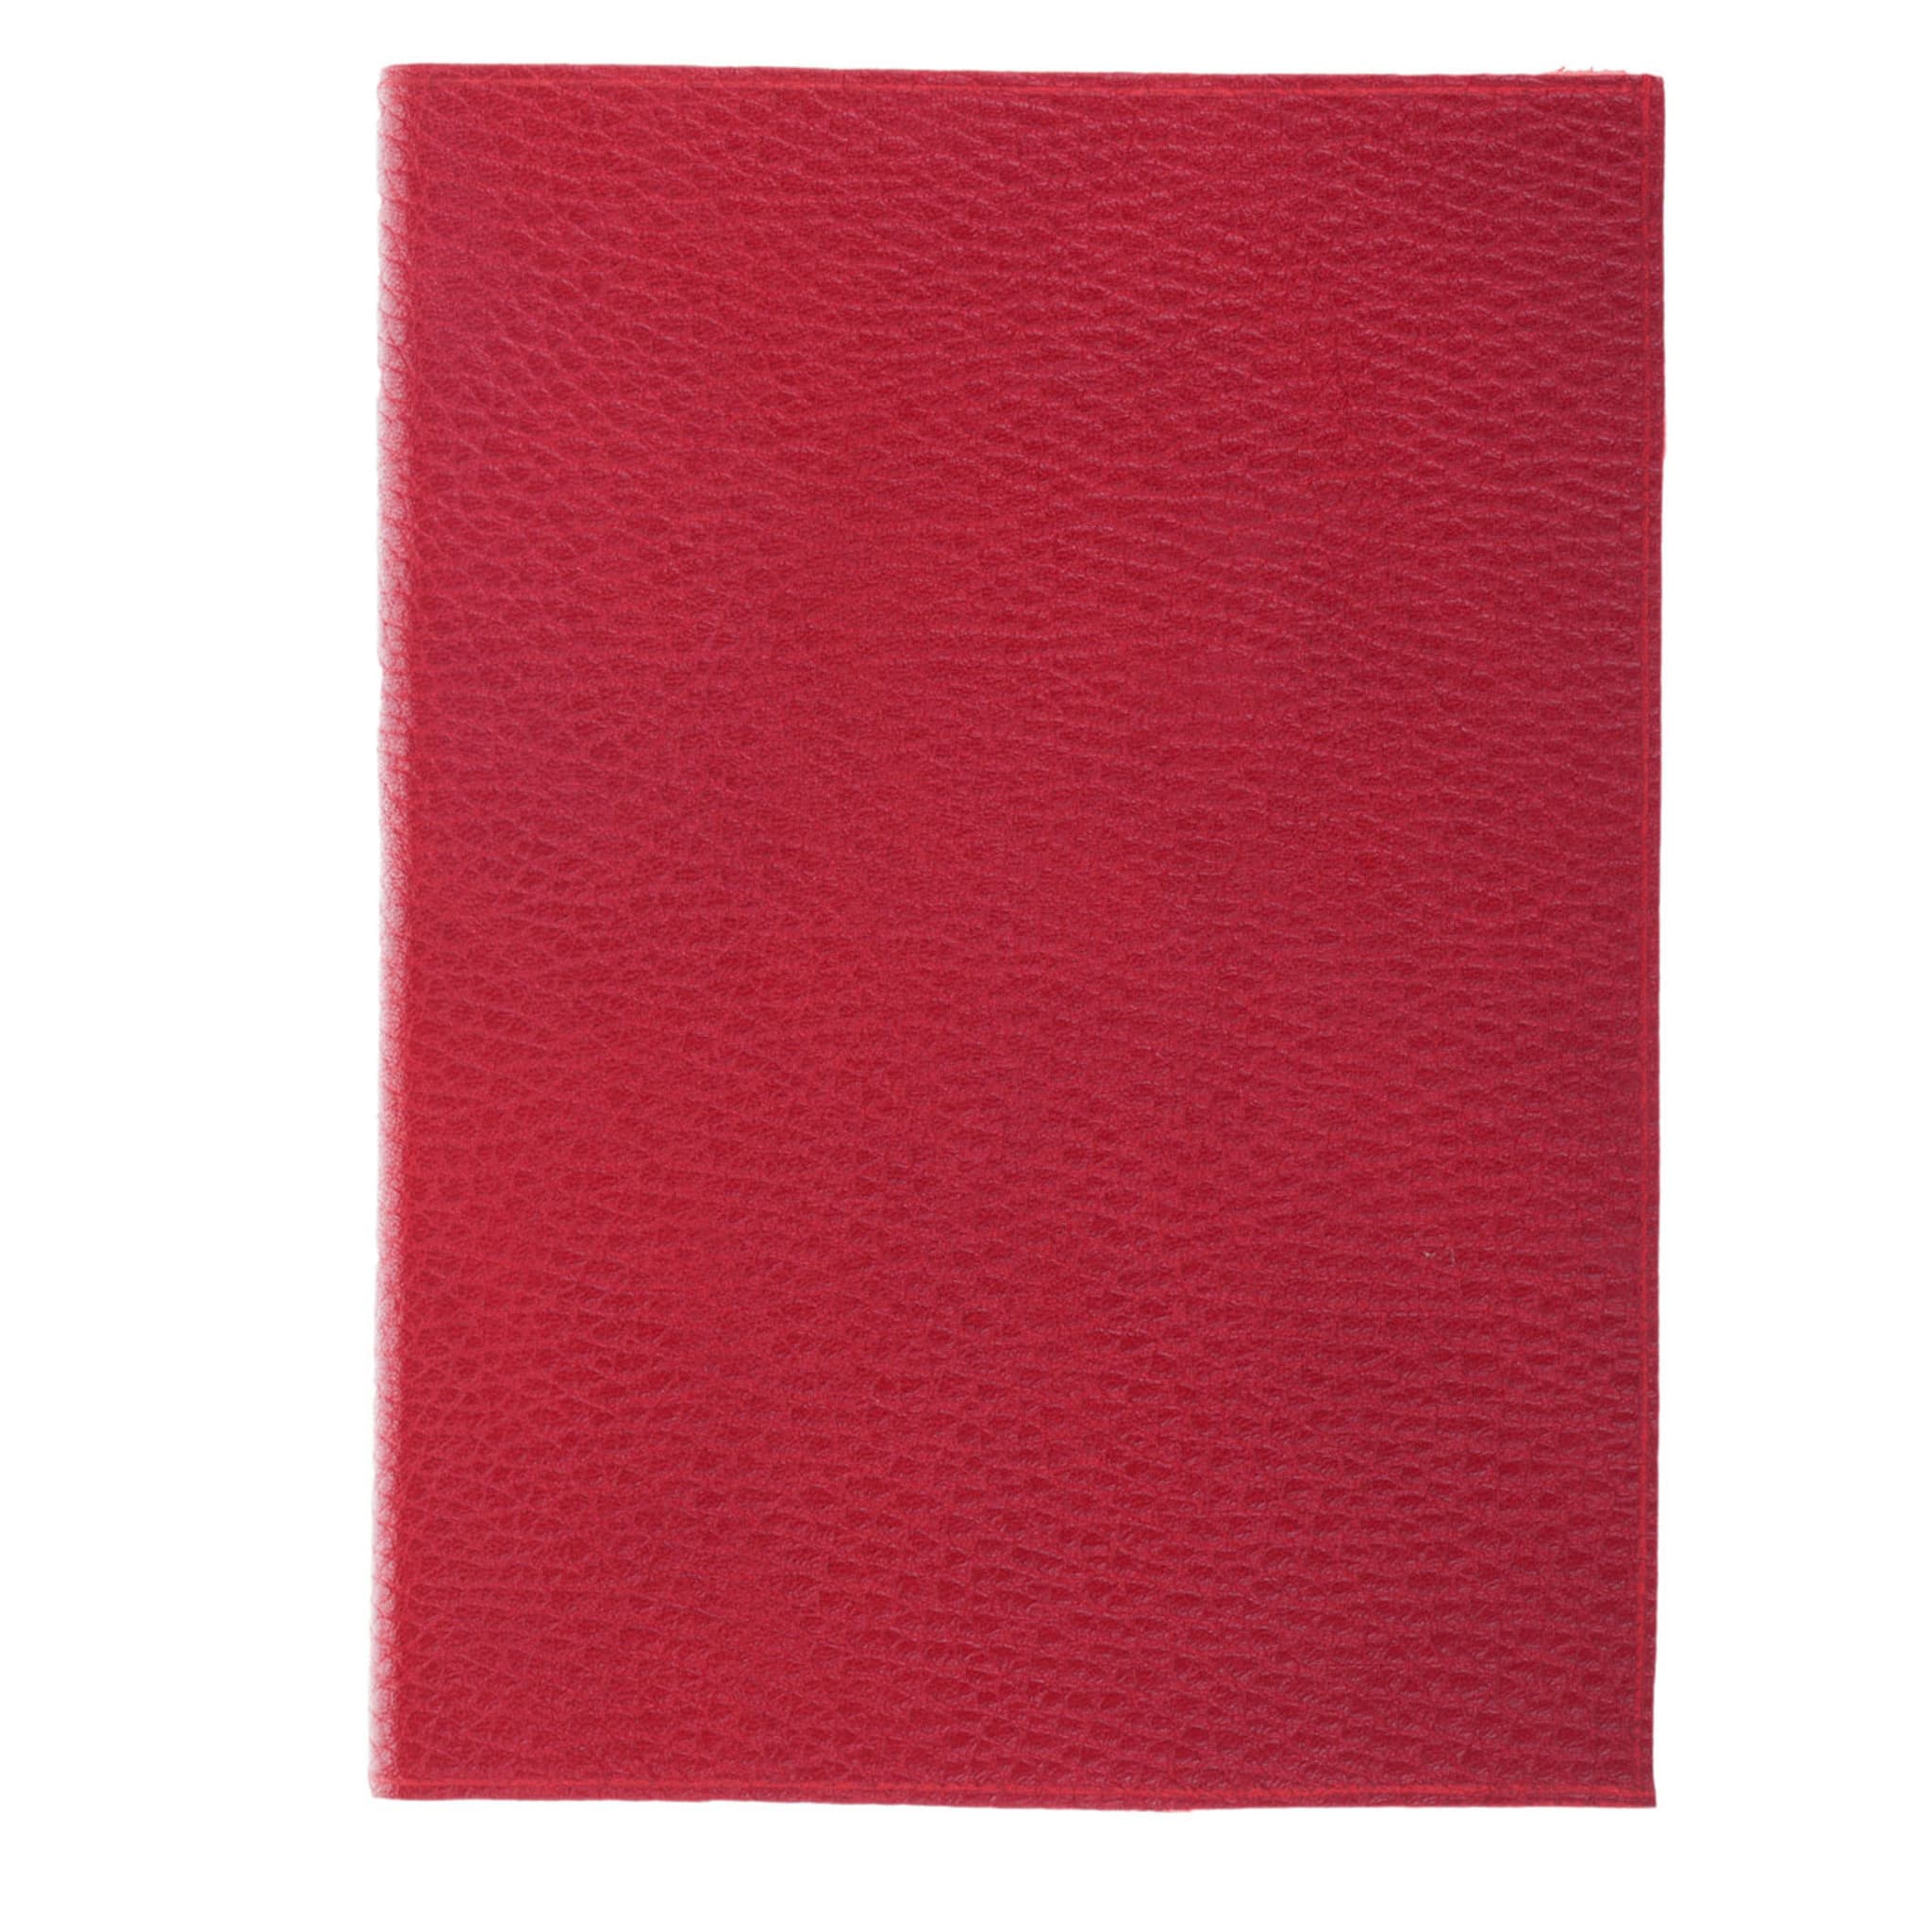 Rossino Leather Notebook - Alternative view 2